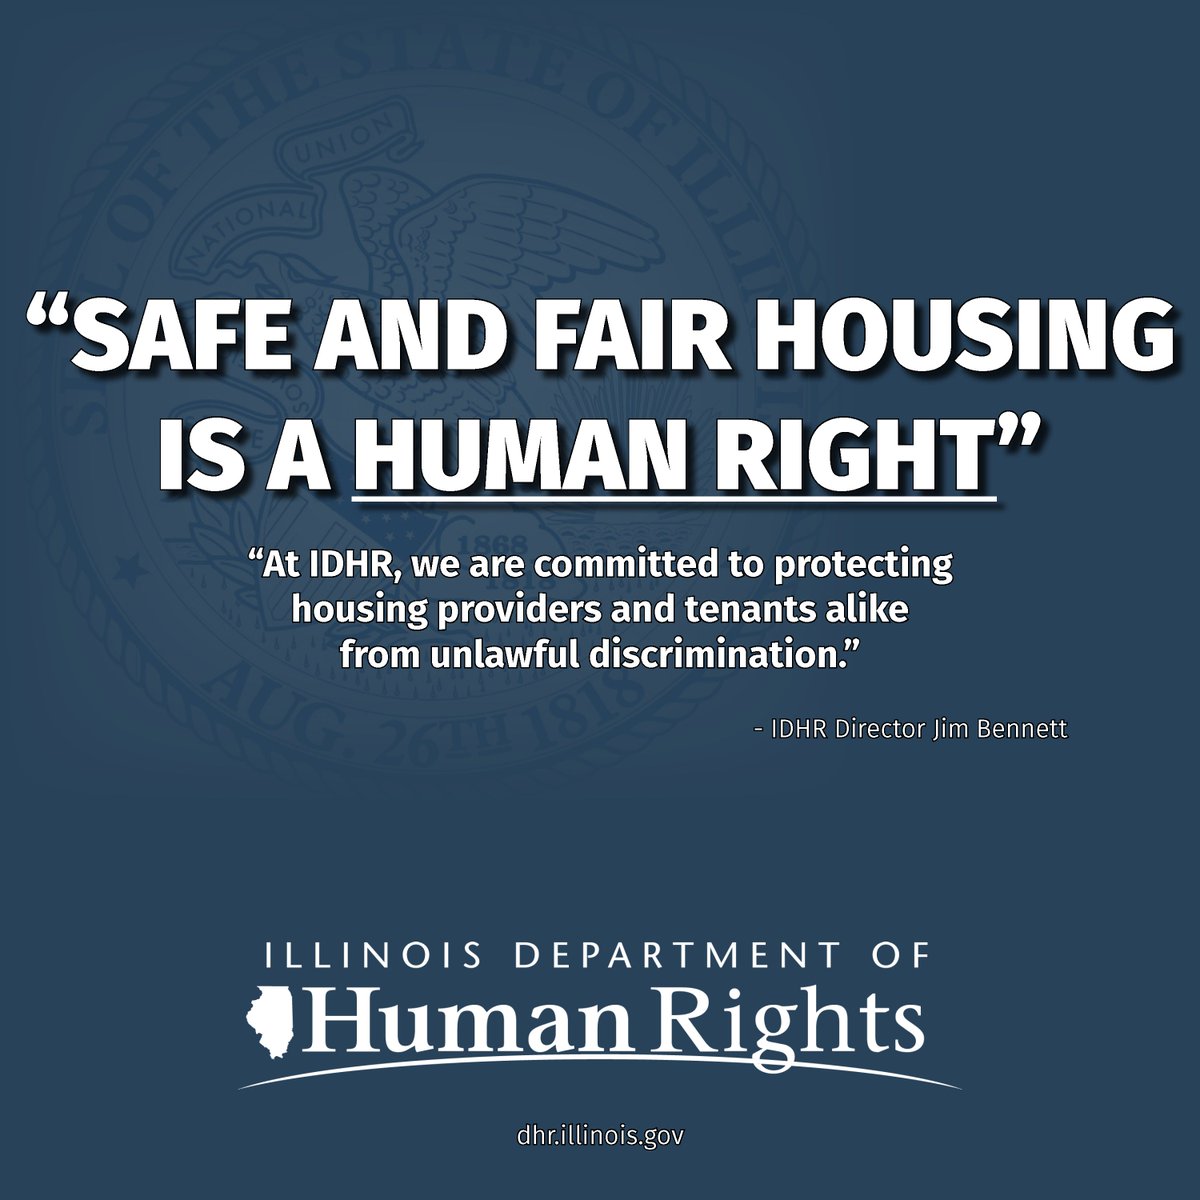 We are proud to release our 'Guidebook on Fair Housing Implications of Nuisance and Crime-Free Ordinances' in partnership with @FairHousingCLC  @uiclaw. View and download the full guidebook and press release here: dhr.illinois.gov/publications/g…